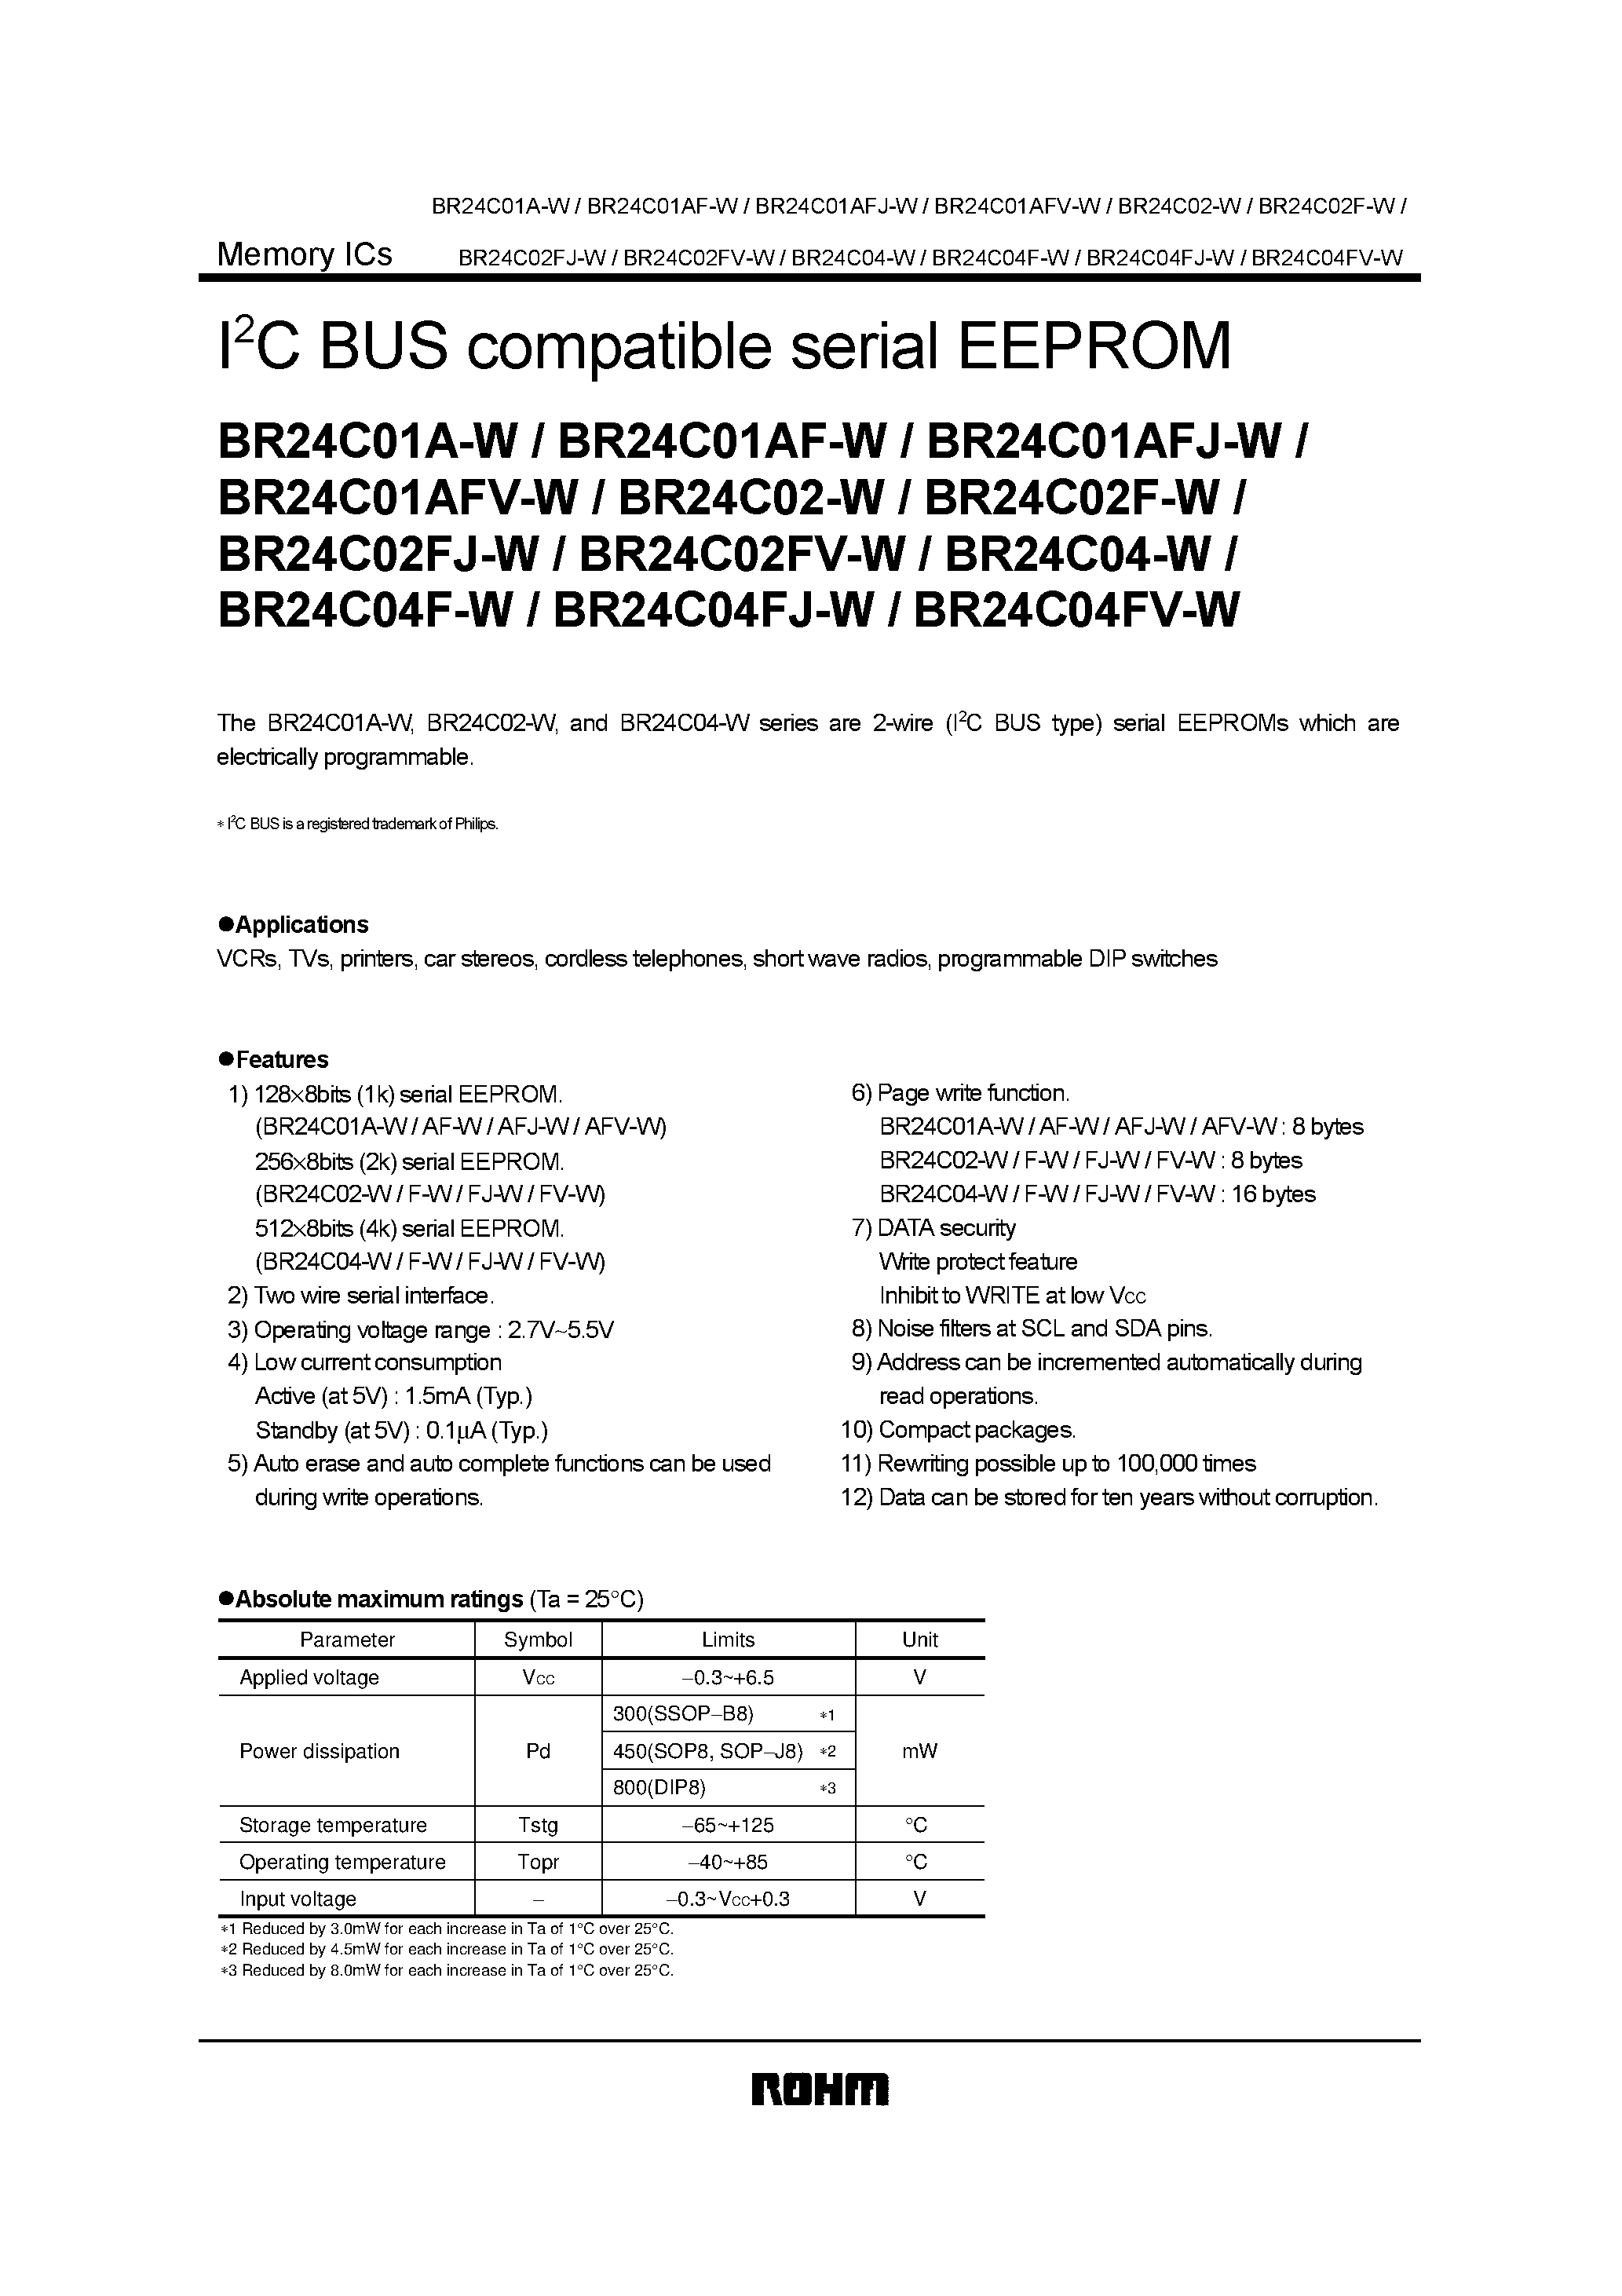 Datasheet BR24C02F-W - I2C BUS compatible serial EEPROM page 1